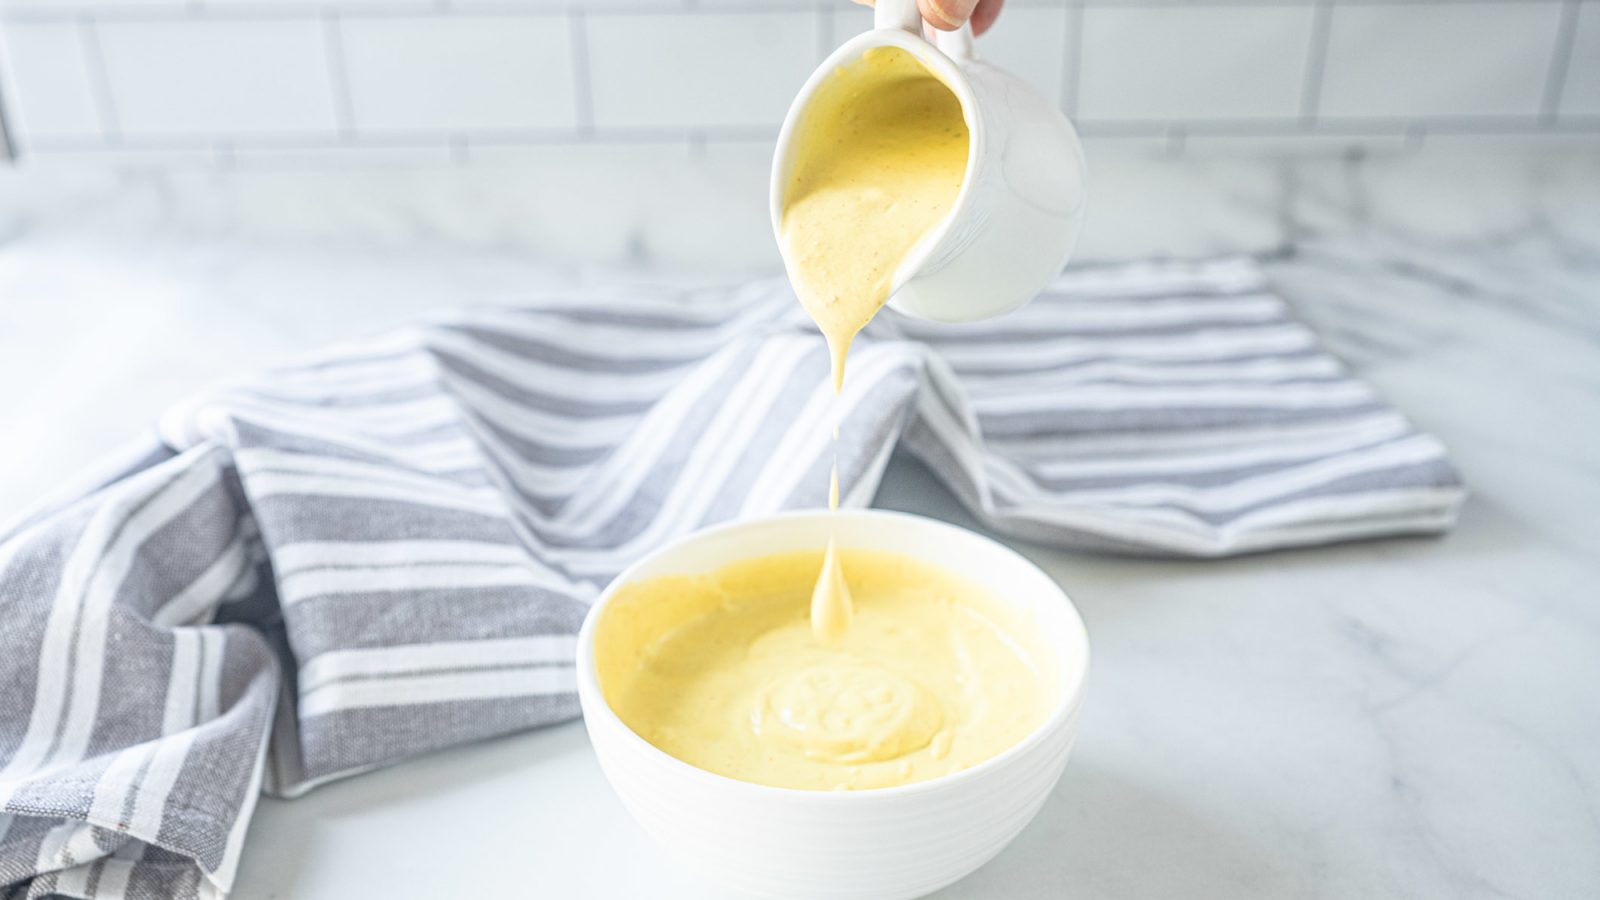 vegan hollandaise sauce being poured into a bowl